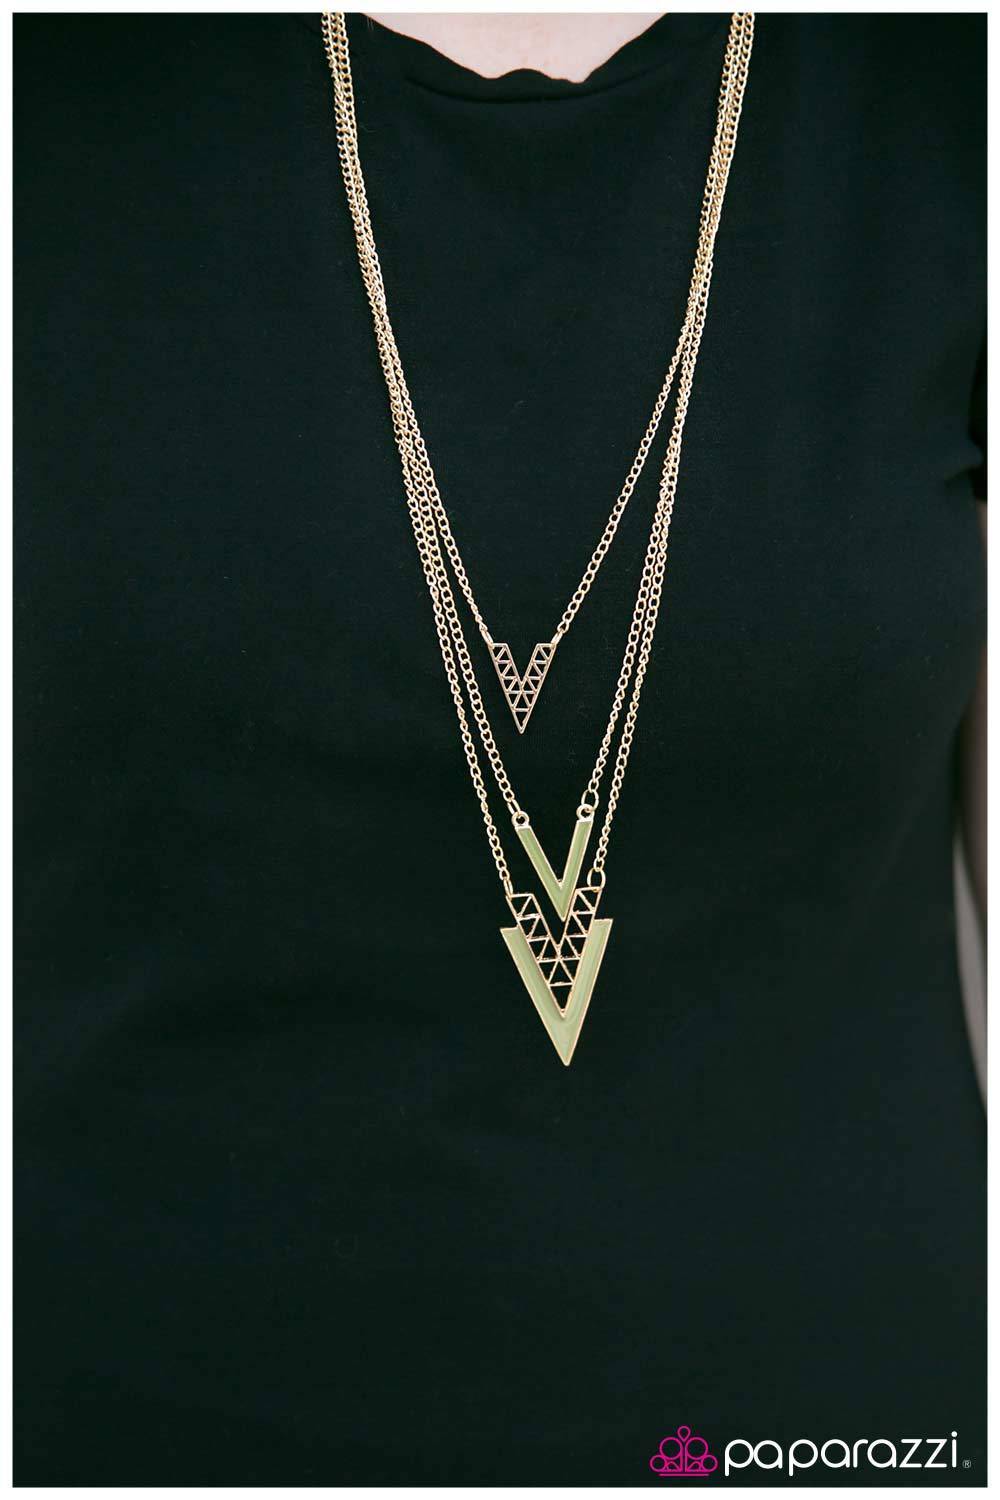 Run Like The Wind Green and Gold Necklace - Paparazzi Accessories-CarasShop.com - $5 Jewelry by Cara Jewels